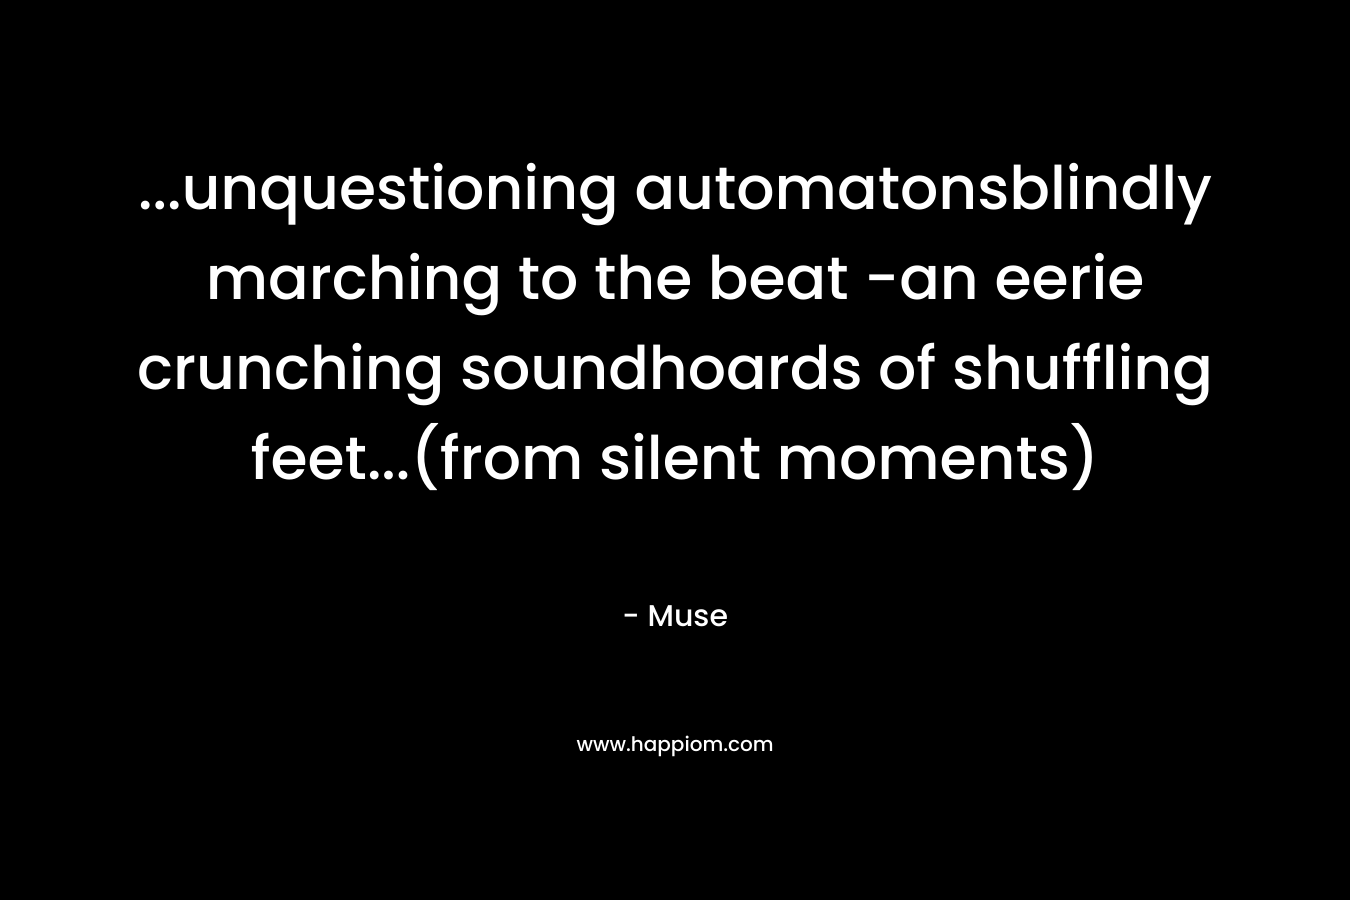 …unquestioning automatonsblindly marching to the beat -an eerie crunching soundhoards of shuffling feet…(from silent moments) – Muse